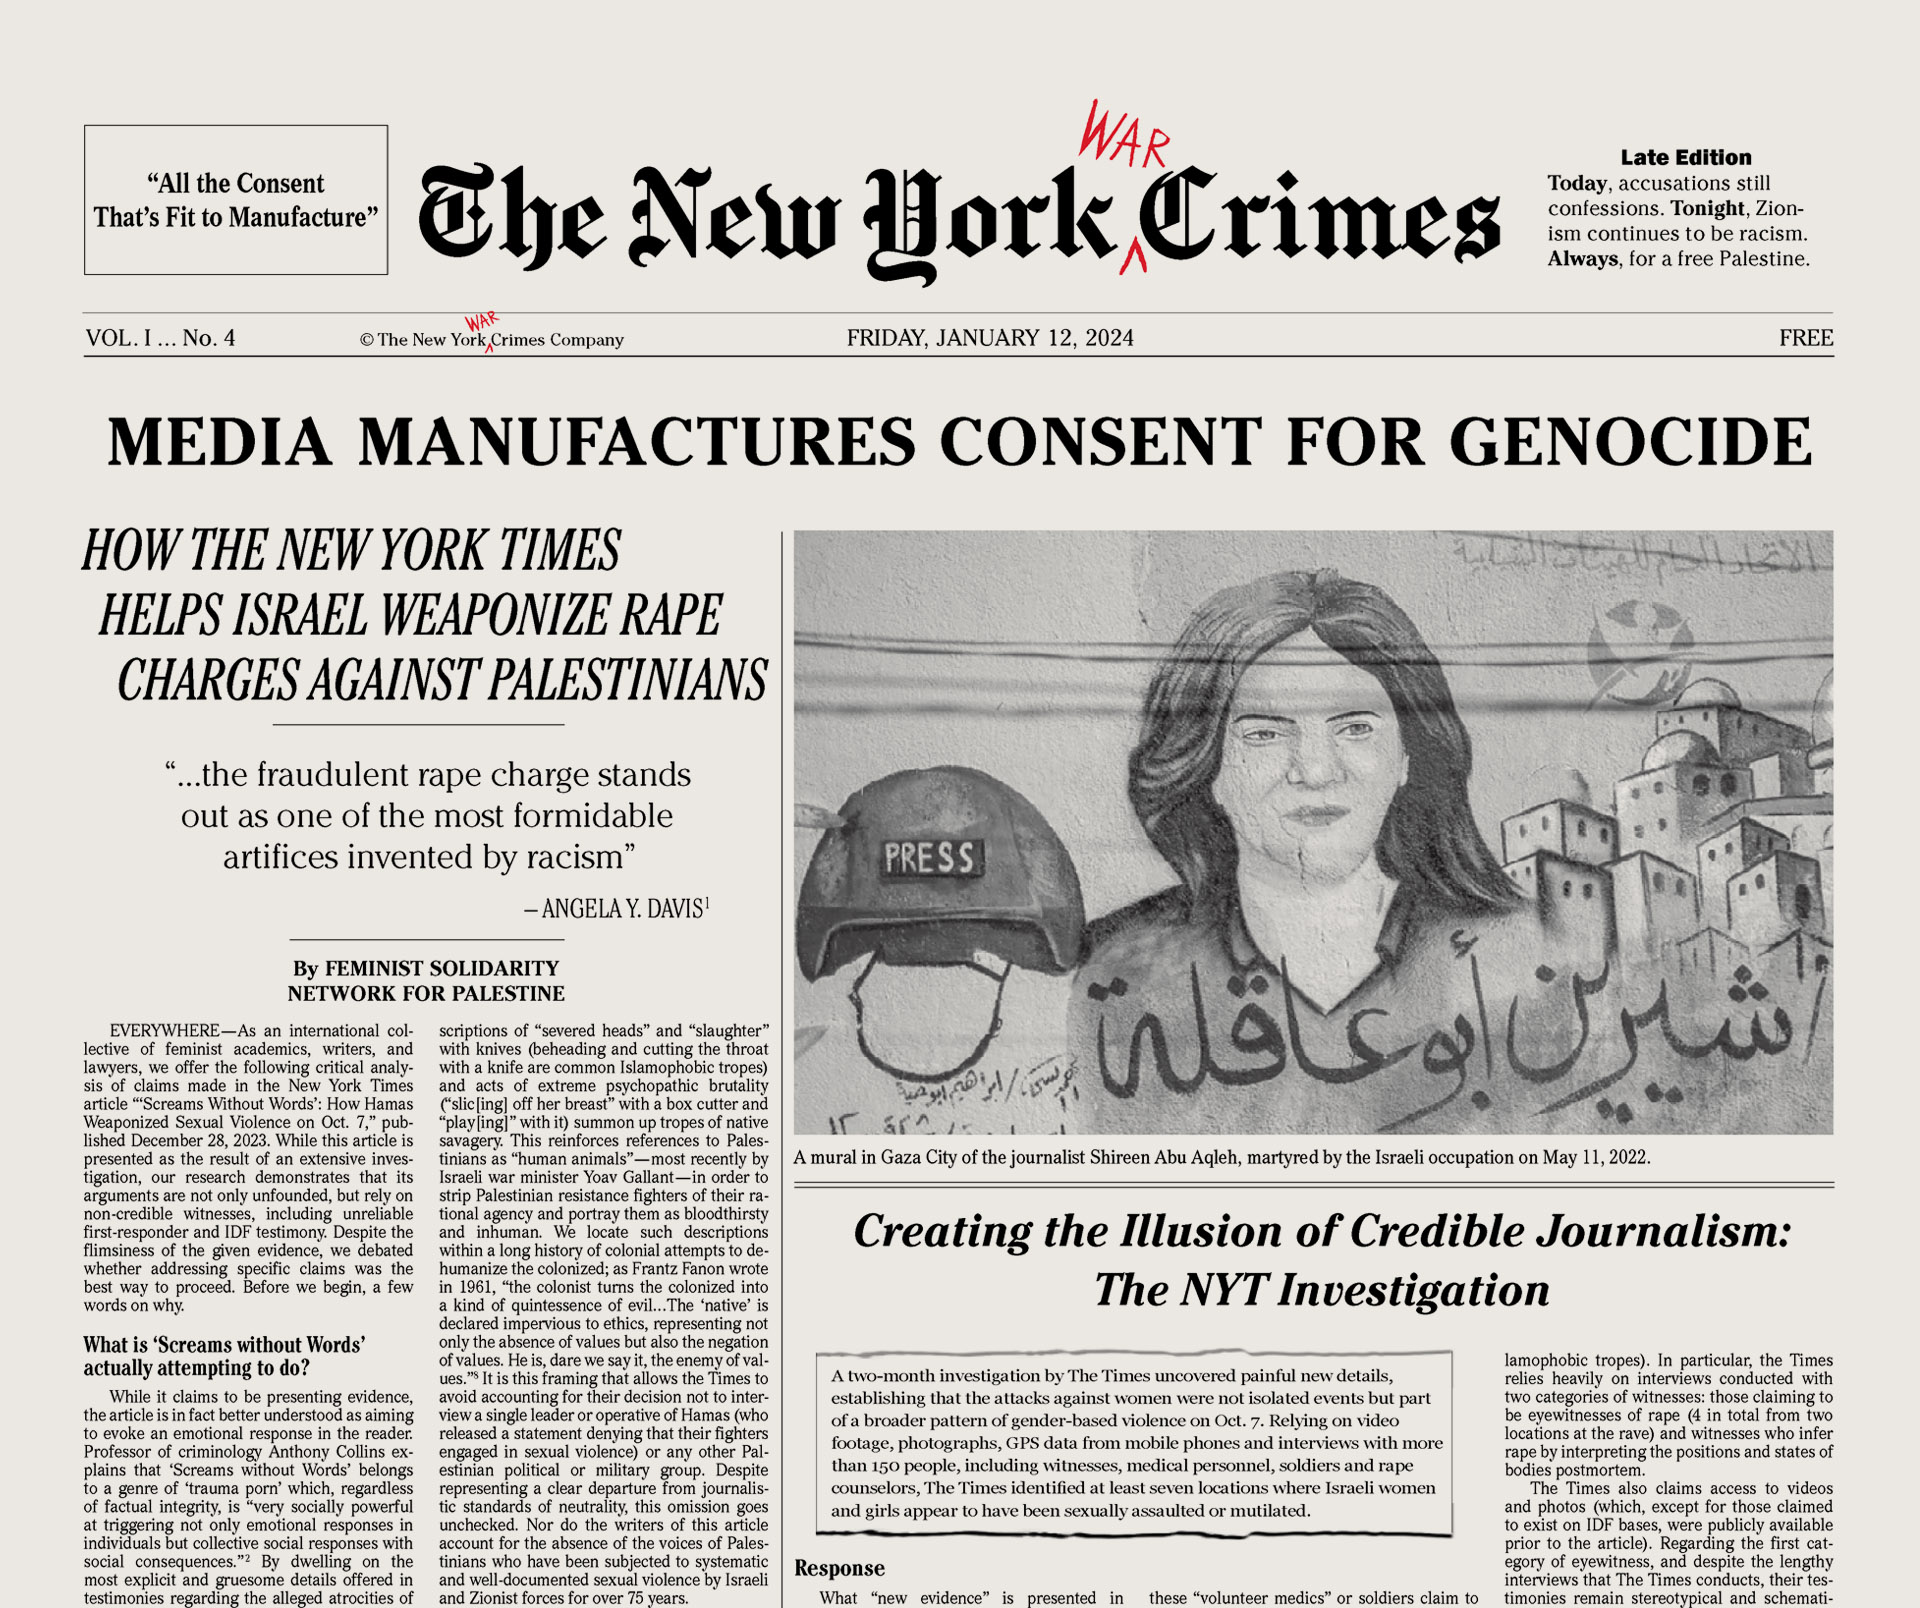 https://newyorkwarcrimes.com/media/pages/print-issue-vol-i-no-4-media-manufactures-consent-for-genocide/ade5b01fd1-1709308326/ny-crimes-04-cover.jpg